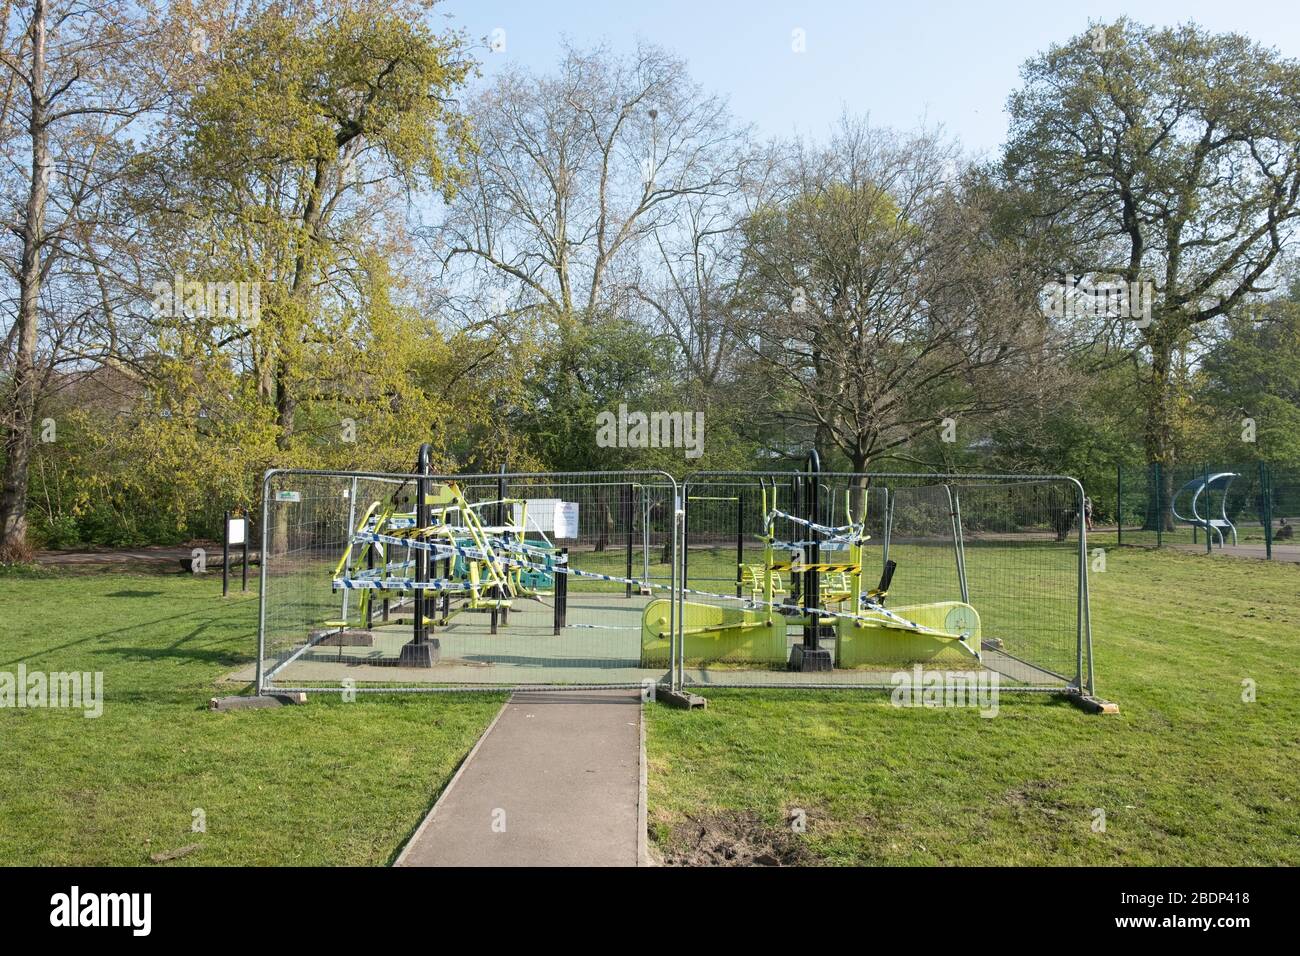 Peckham Rye Park, London, UK. 9th Apr, 2020. An outdoor gym covered in police tape and barriers as the lockdown in London and the UK continues. Credit: Tom Leighton/Alamy Live News Stock Photo